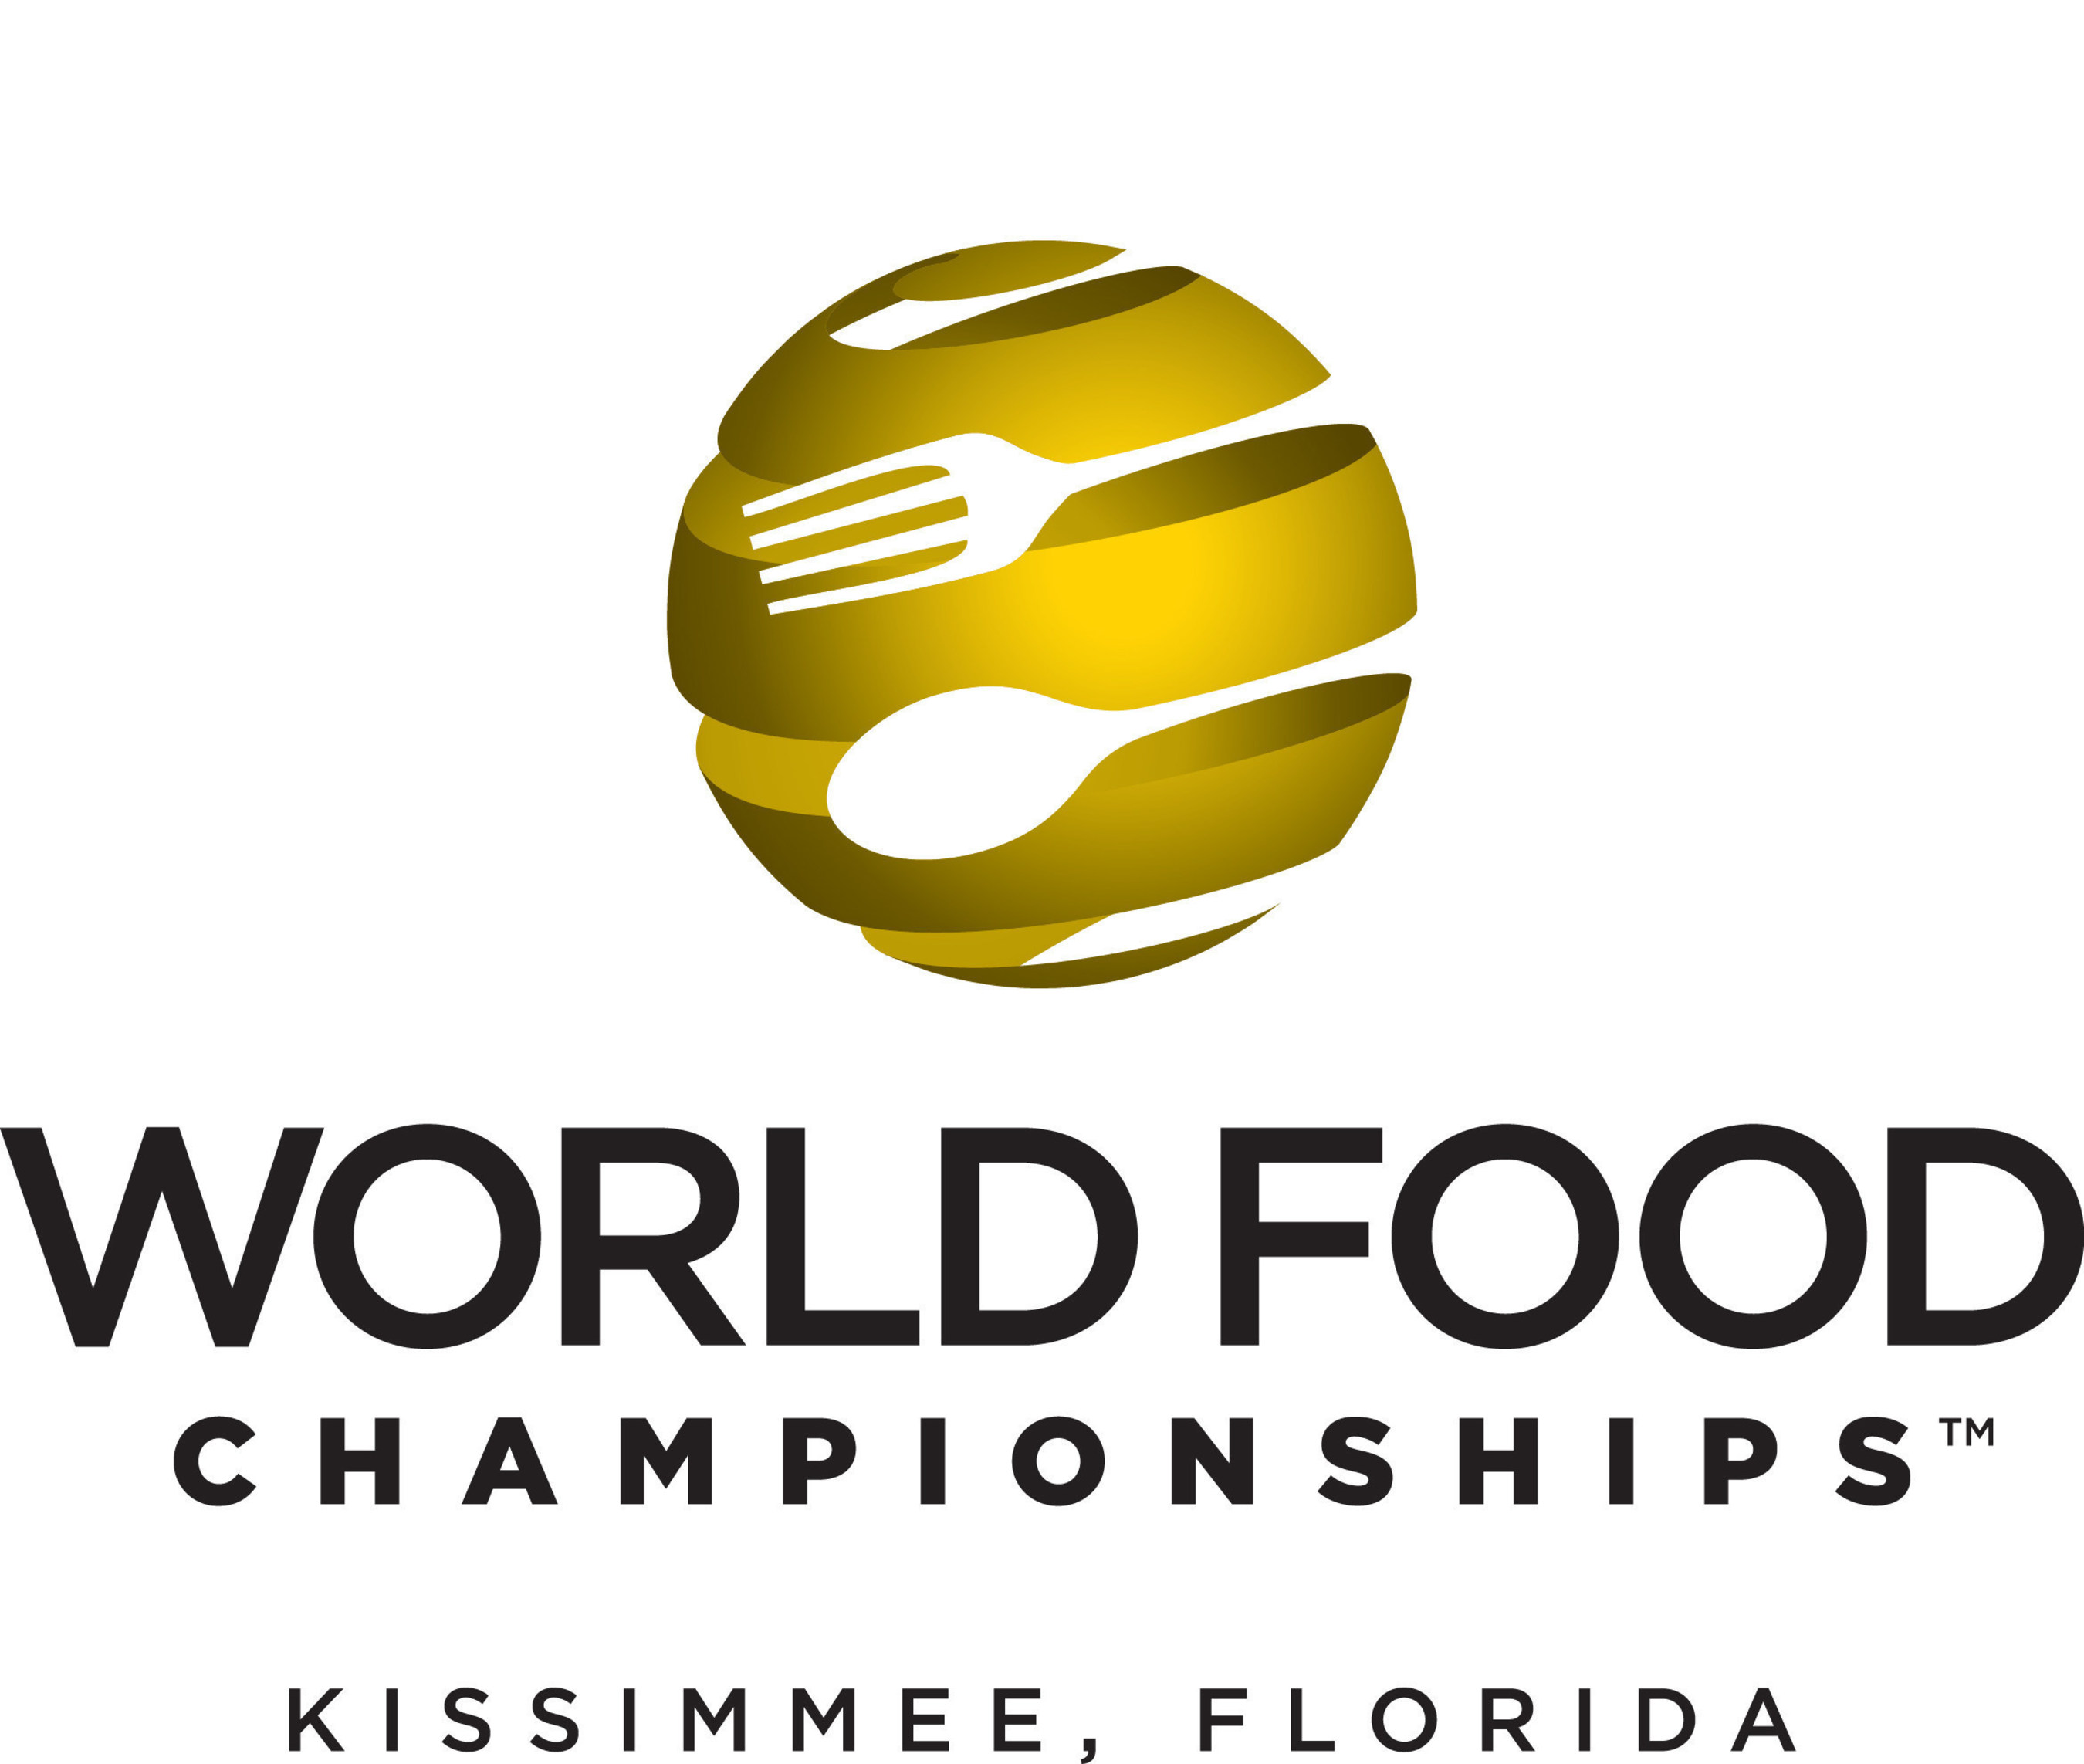 WORLD FOOD CHAMPIONSHIPS, worldfoodchampionships.com, the world's largest Food Sport competition.